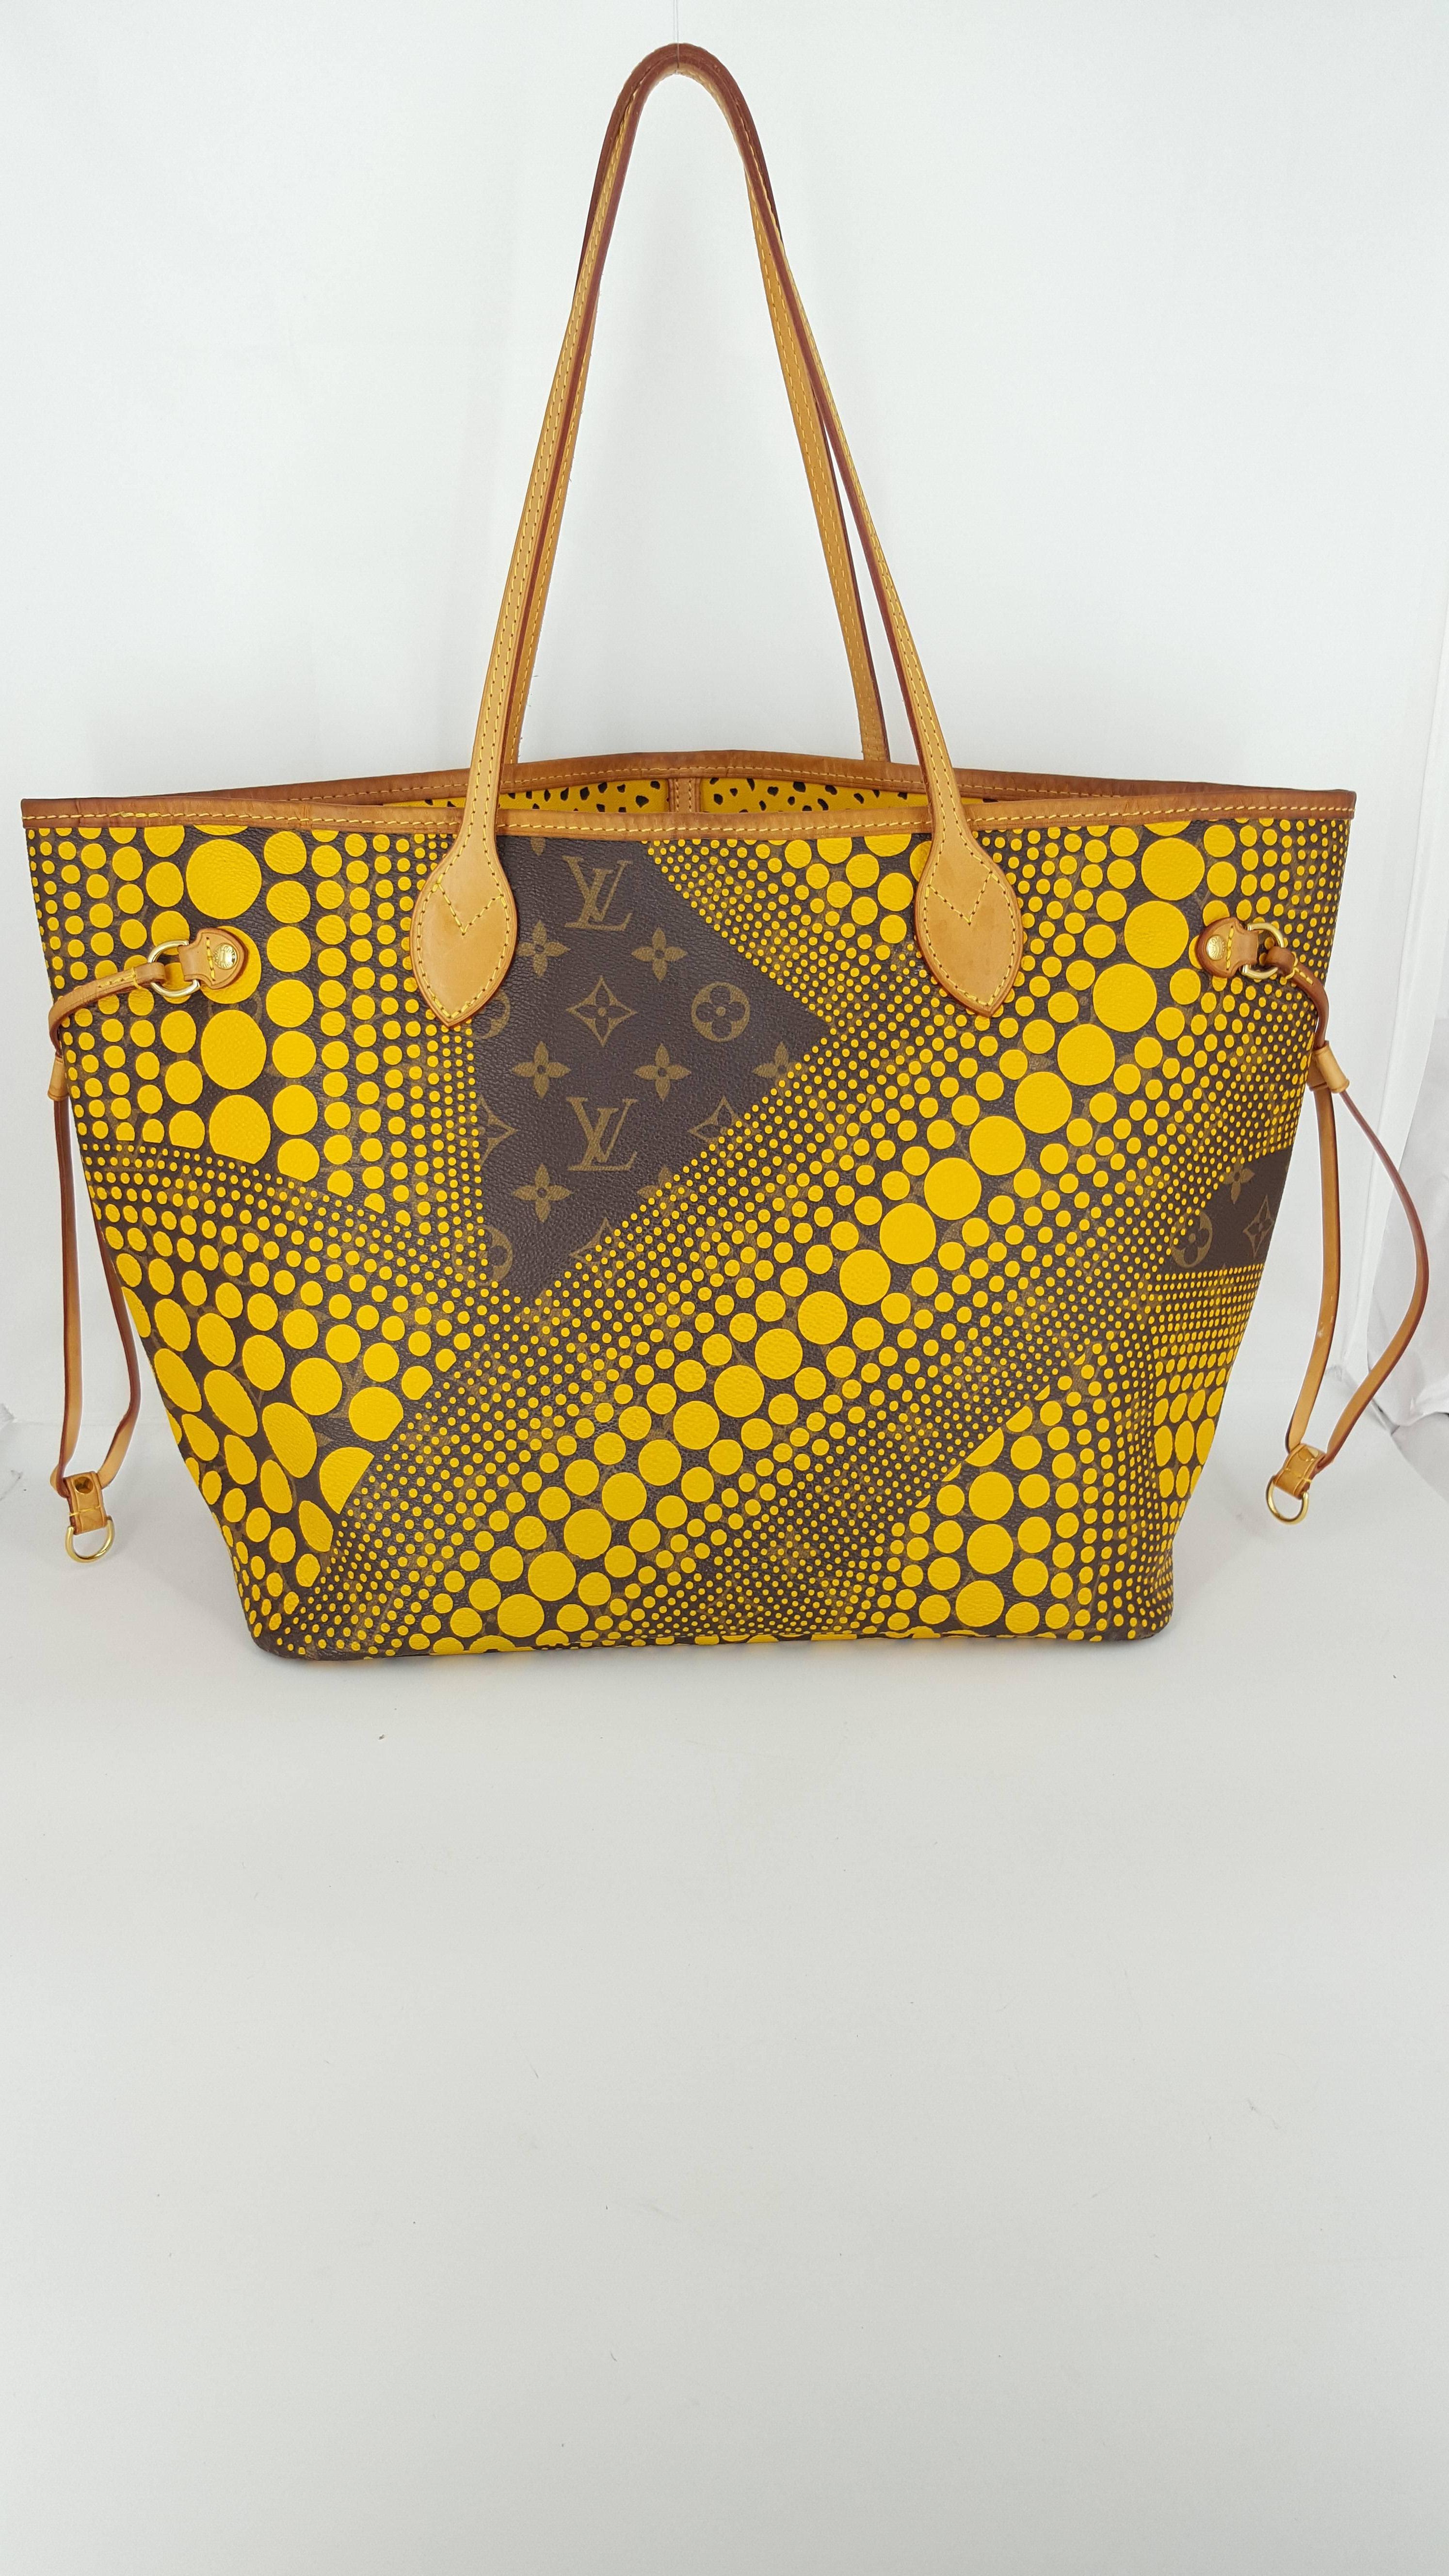 Offered for sale is this rare Louis Vuitton Waves Neverfull designed by the famous Japanese Artist and writer Yoyoi Kusama.  This was quickly sold out and very desirable.  Being the MM size, it is perfect for everyday.  The interior is a yellow